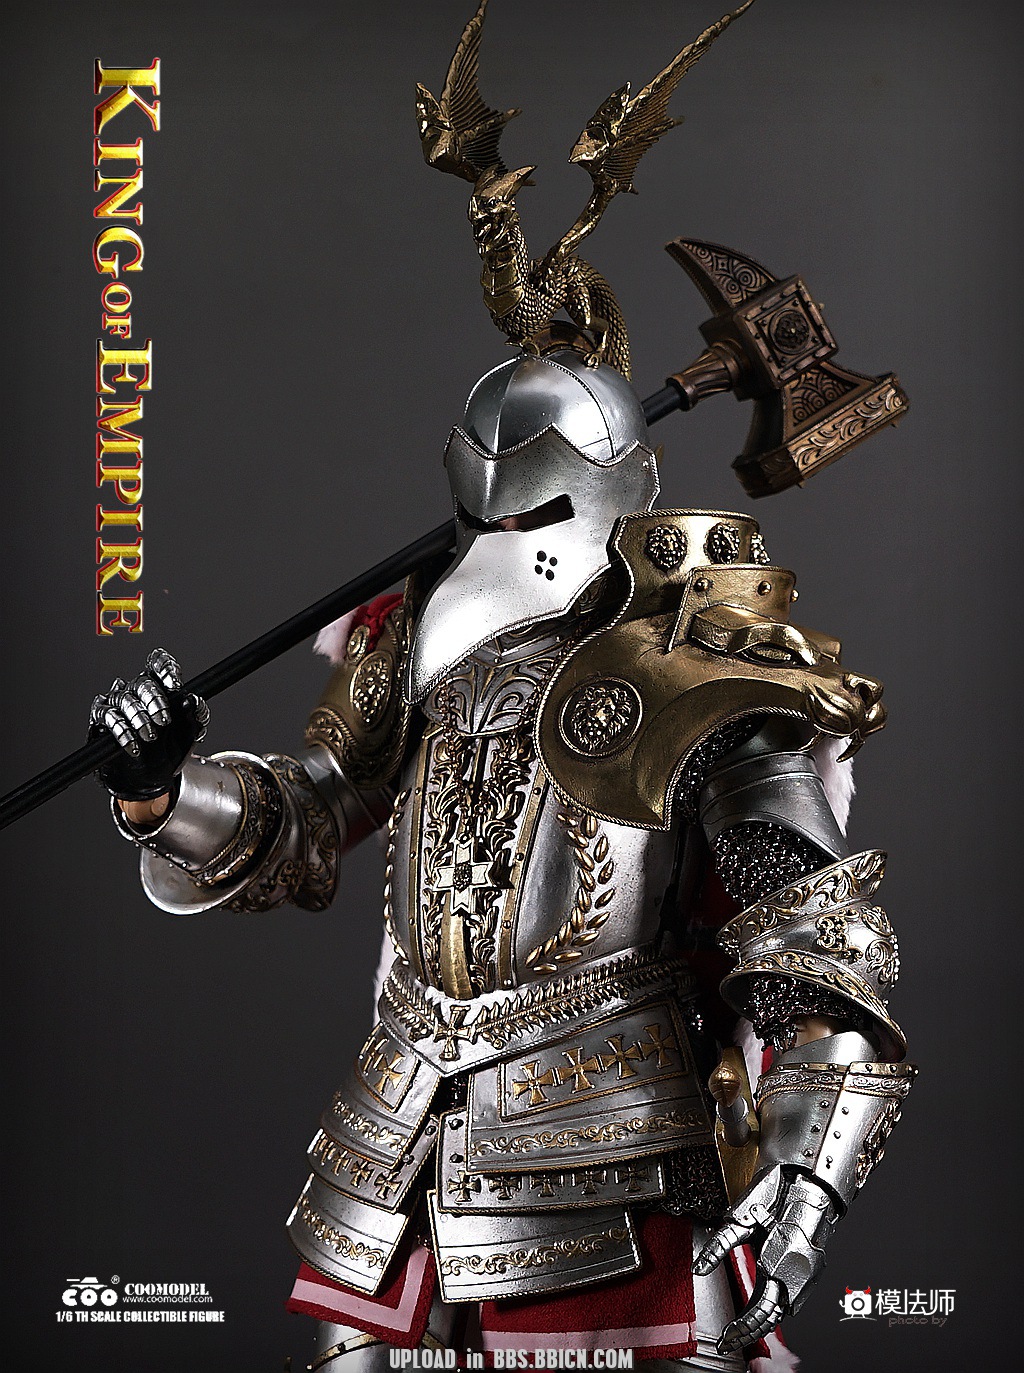 NightmareSeries - NEW PRODUCT: COOMODEL: 1/6 Nightmare Series-King of the Empire, Bishop of the Empire-Alloy Standard Edition/Pure Copper Collector's Edition NS016/7/8/9 23030310